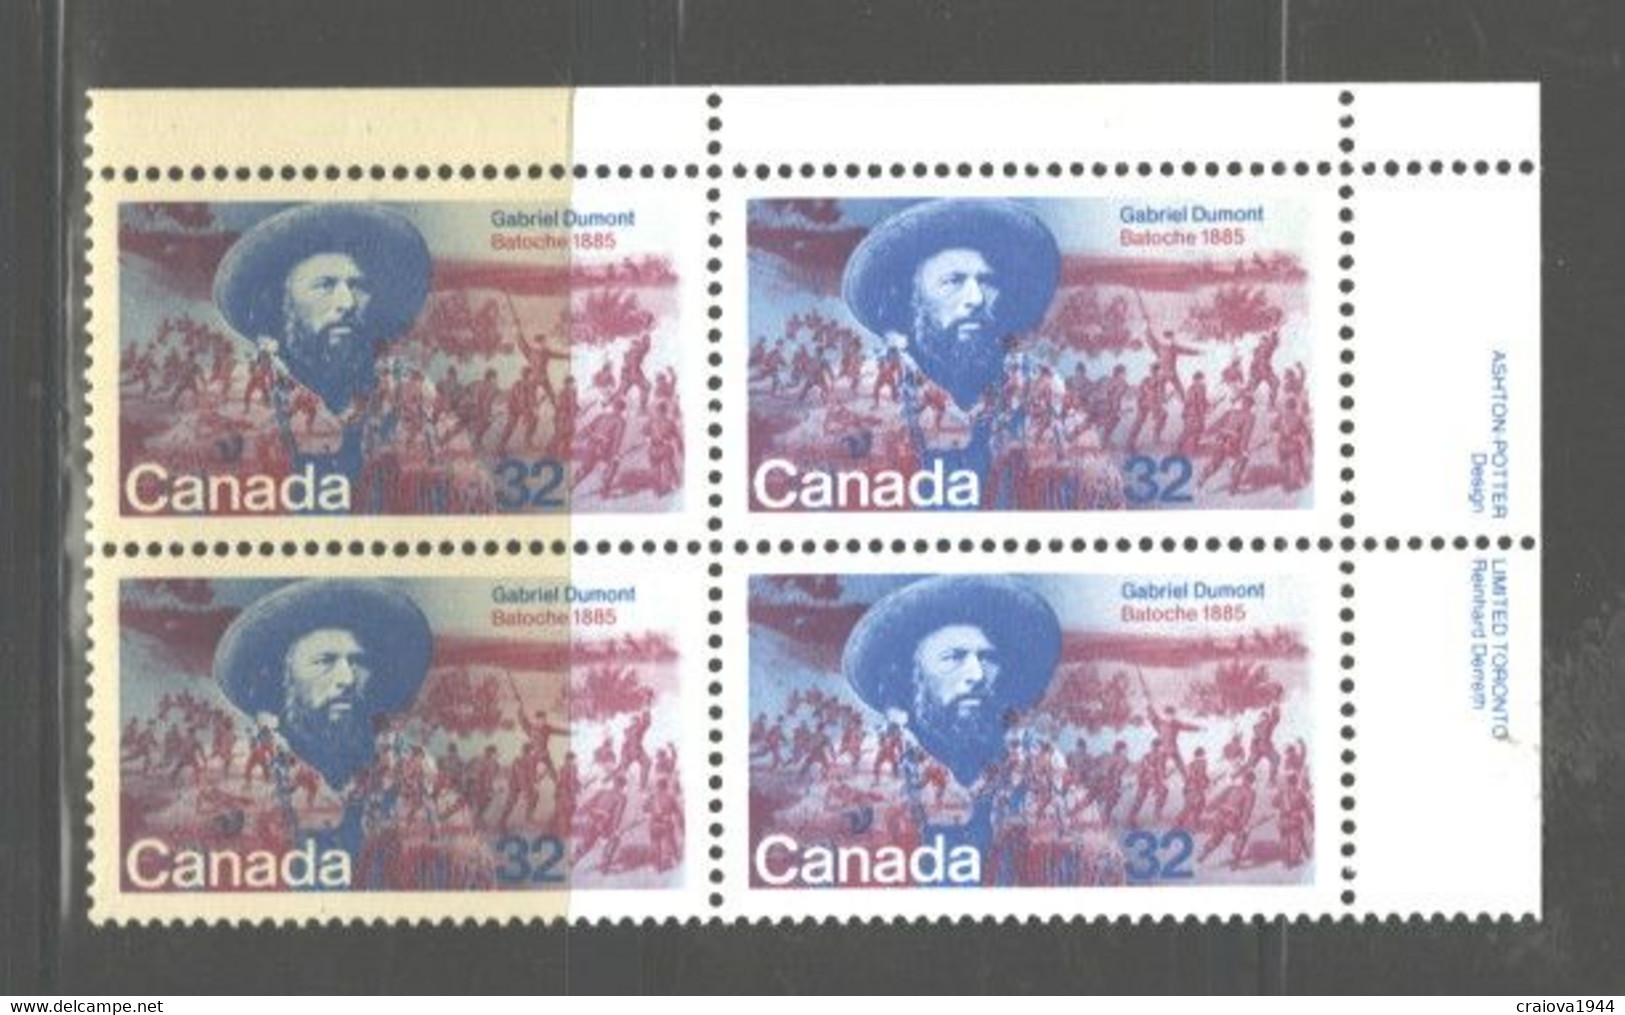 CANADA 1984 "JEAN CARTIER" #1011ii  (DF) PB  UL MNH  C.V.=$30.00 - Num. Planches & Inscriptions Marge